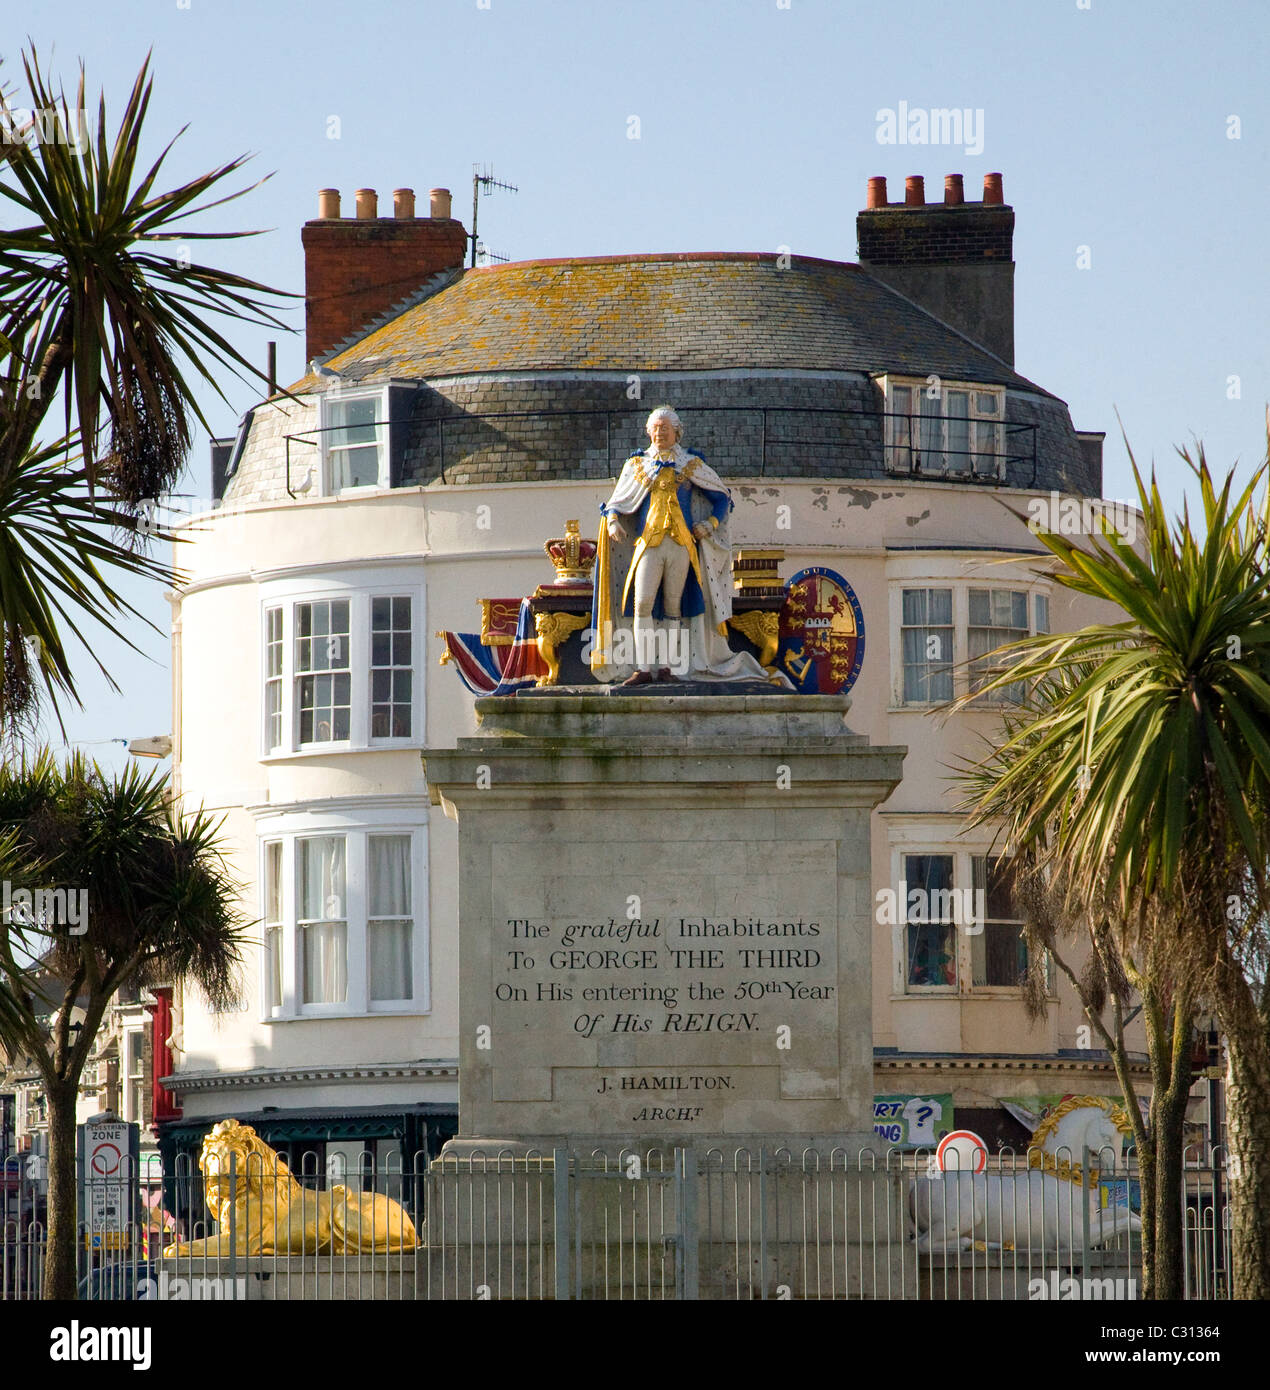 Le roi George III Esplanade Weymouth Dorset Angleterre statue Banque D'Images